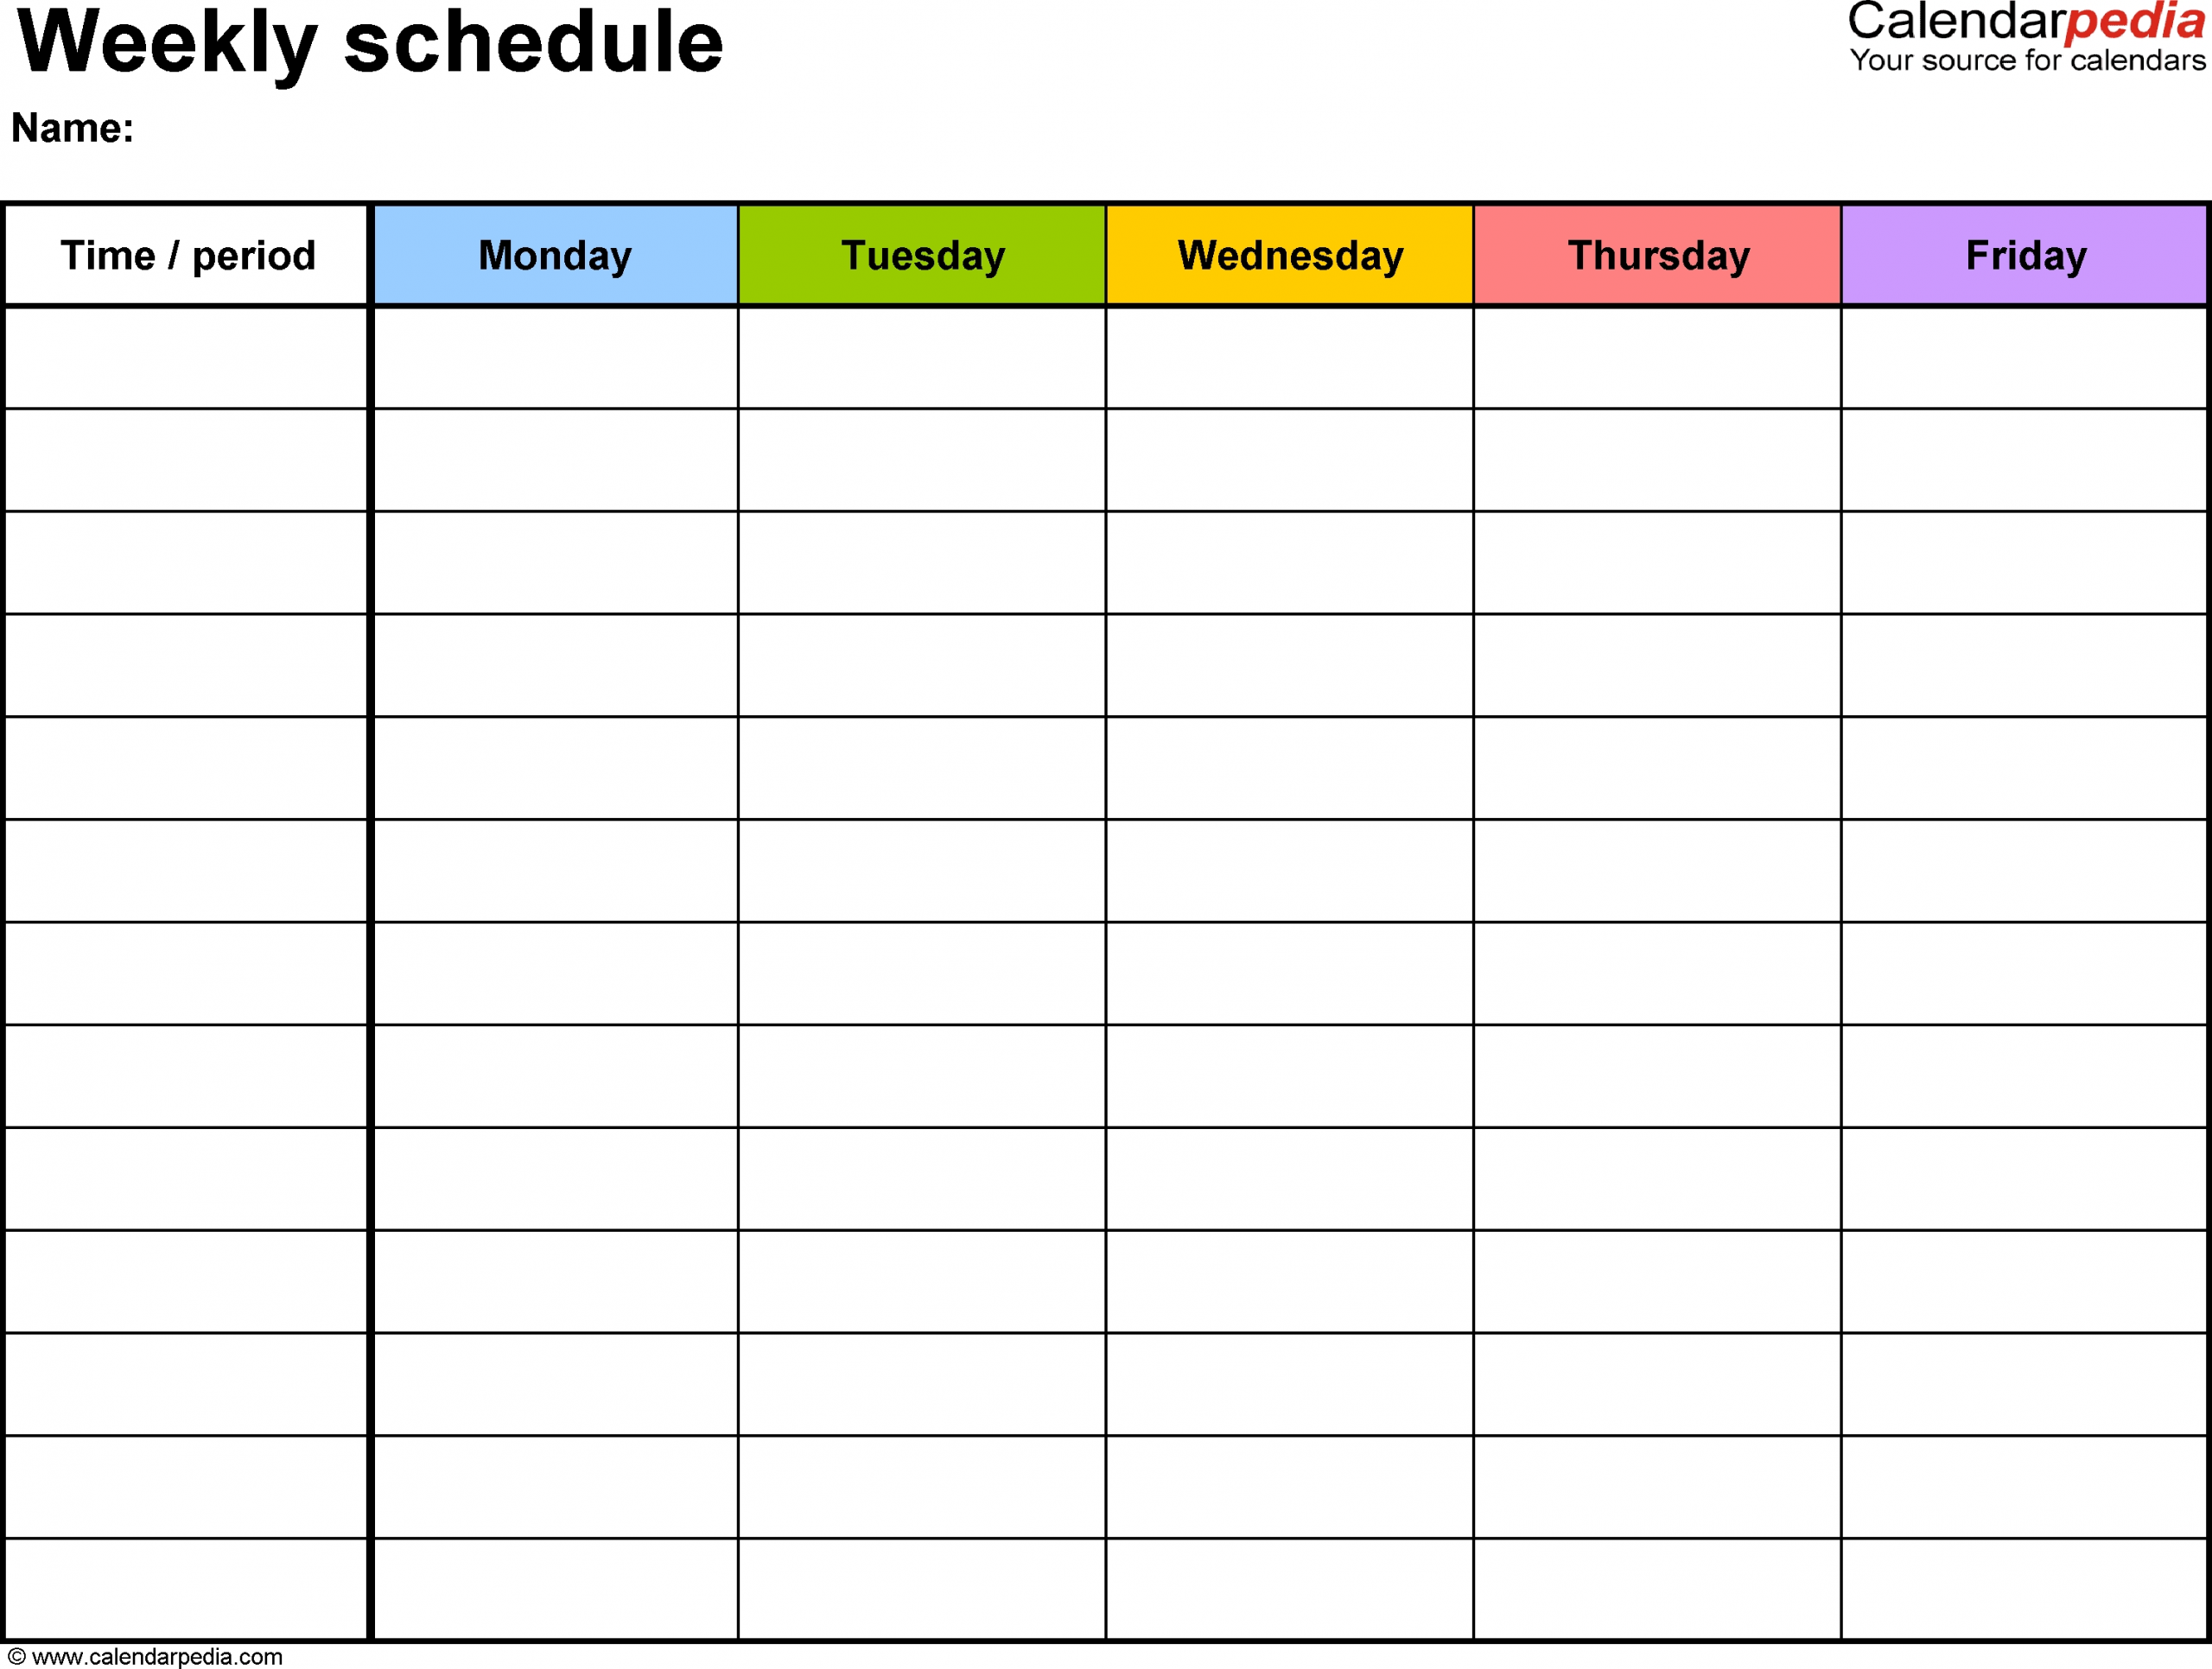 Free Weekly Schedule Templates For Word - 18 Templates pertaining to Printable Blank Weekly Calendars Templates